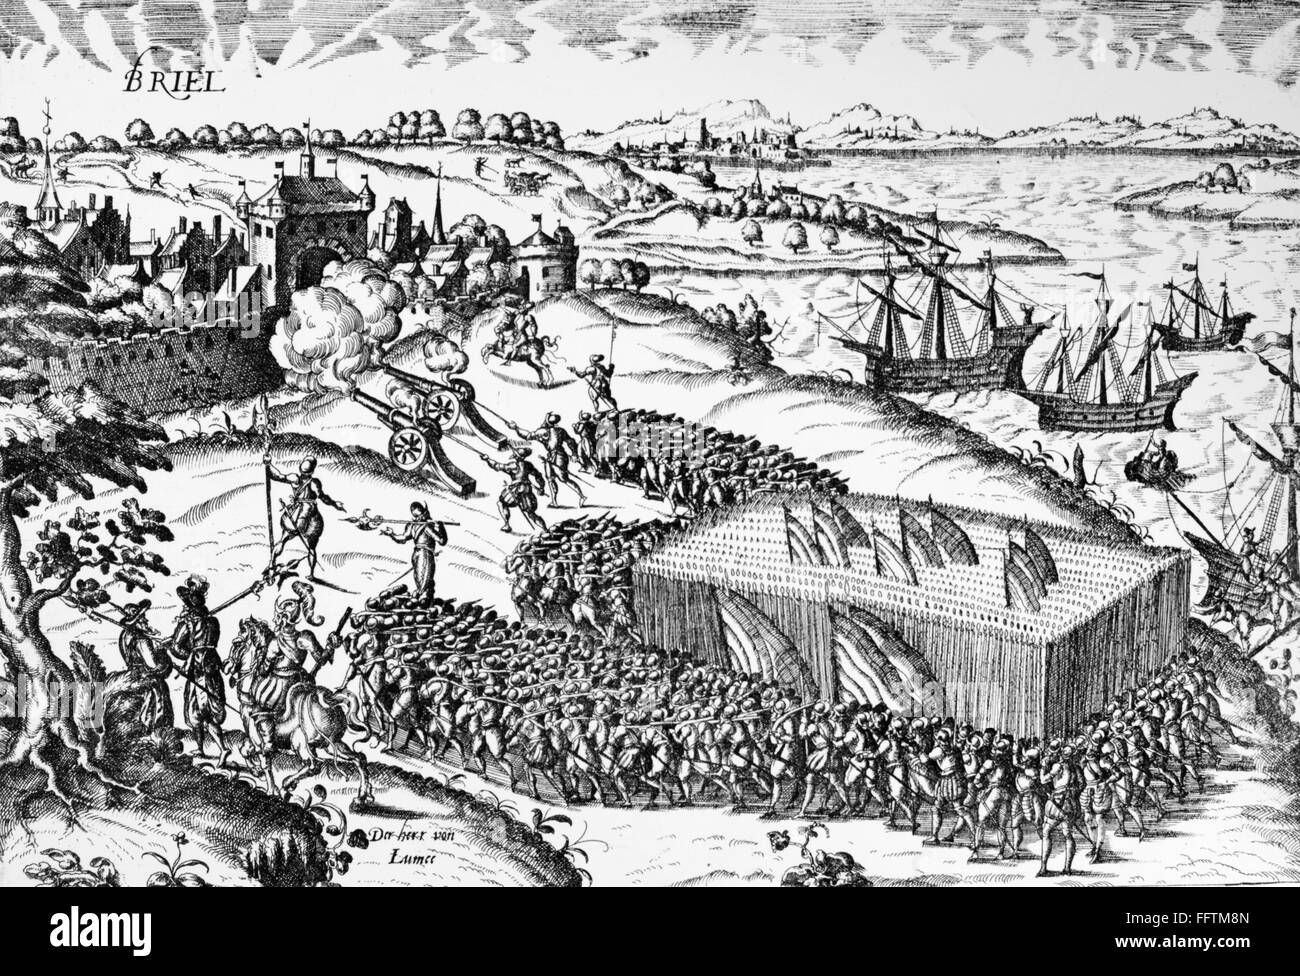 80 YEARS WAR, 1572. /nSpanish troops, led by the Duke of Alba, attacking the Dutch town of Brielle, which had been captured by Protestant rebels, the Sea Beggars, on 1 April 1572. Line engrraving by Franz Hogenburg, 1590. Stock Photo